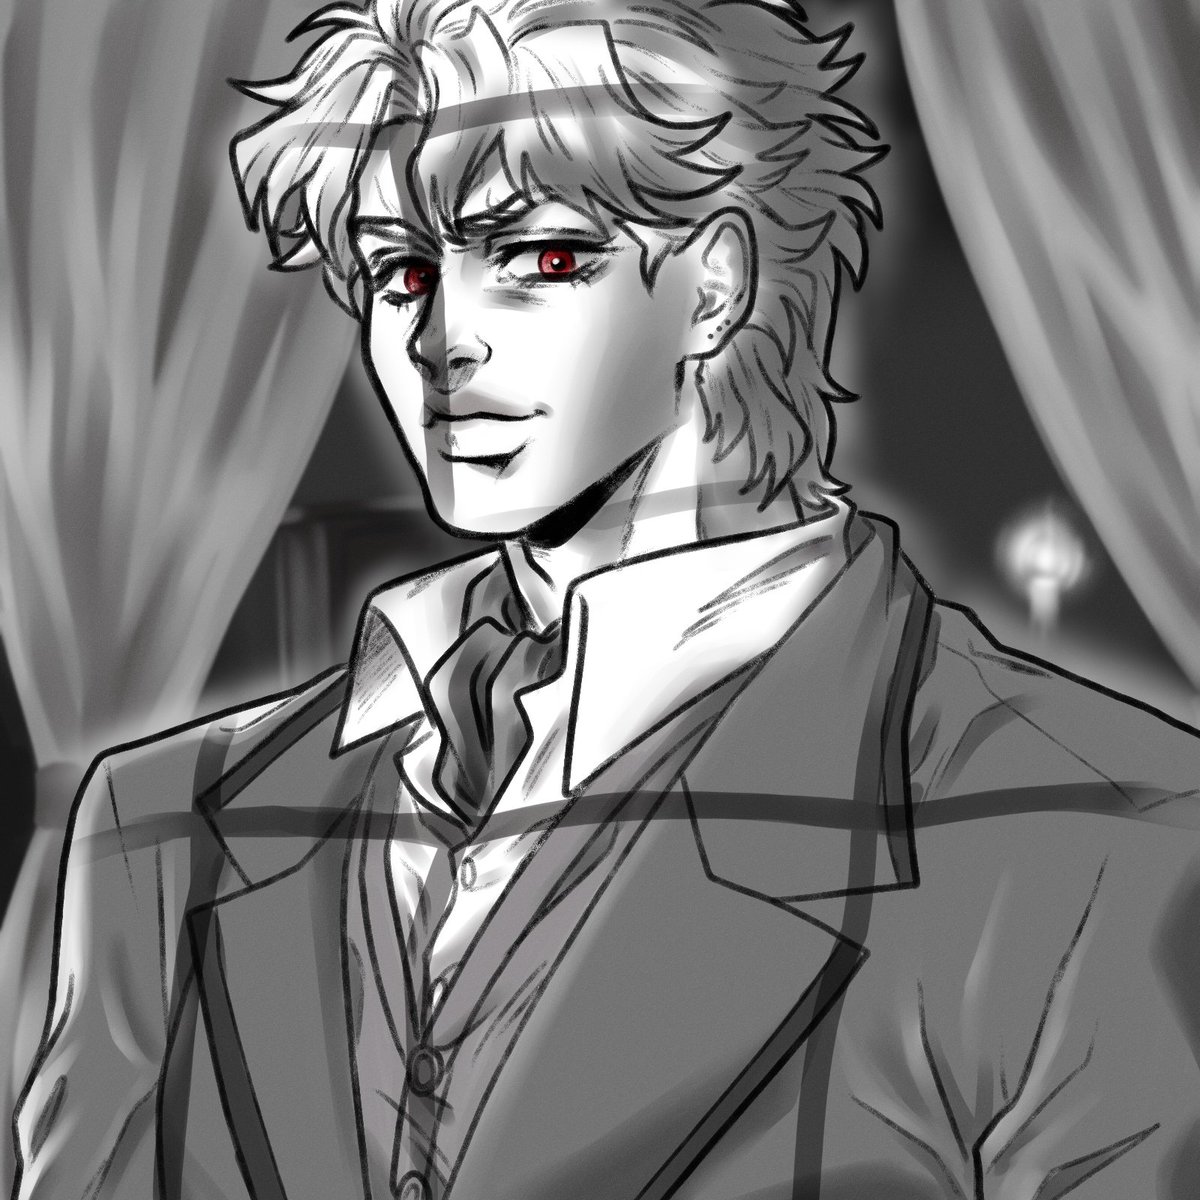 I wanted to try again SAI, cuz I missed a little bit... 

Just a rough sketch of my lovely babe. uvu ❤️❤️❤️

#jjba #diobrando #sketch #PainToolSAI